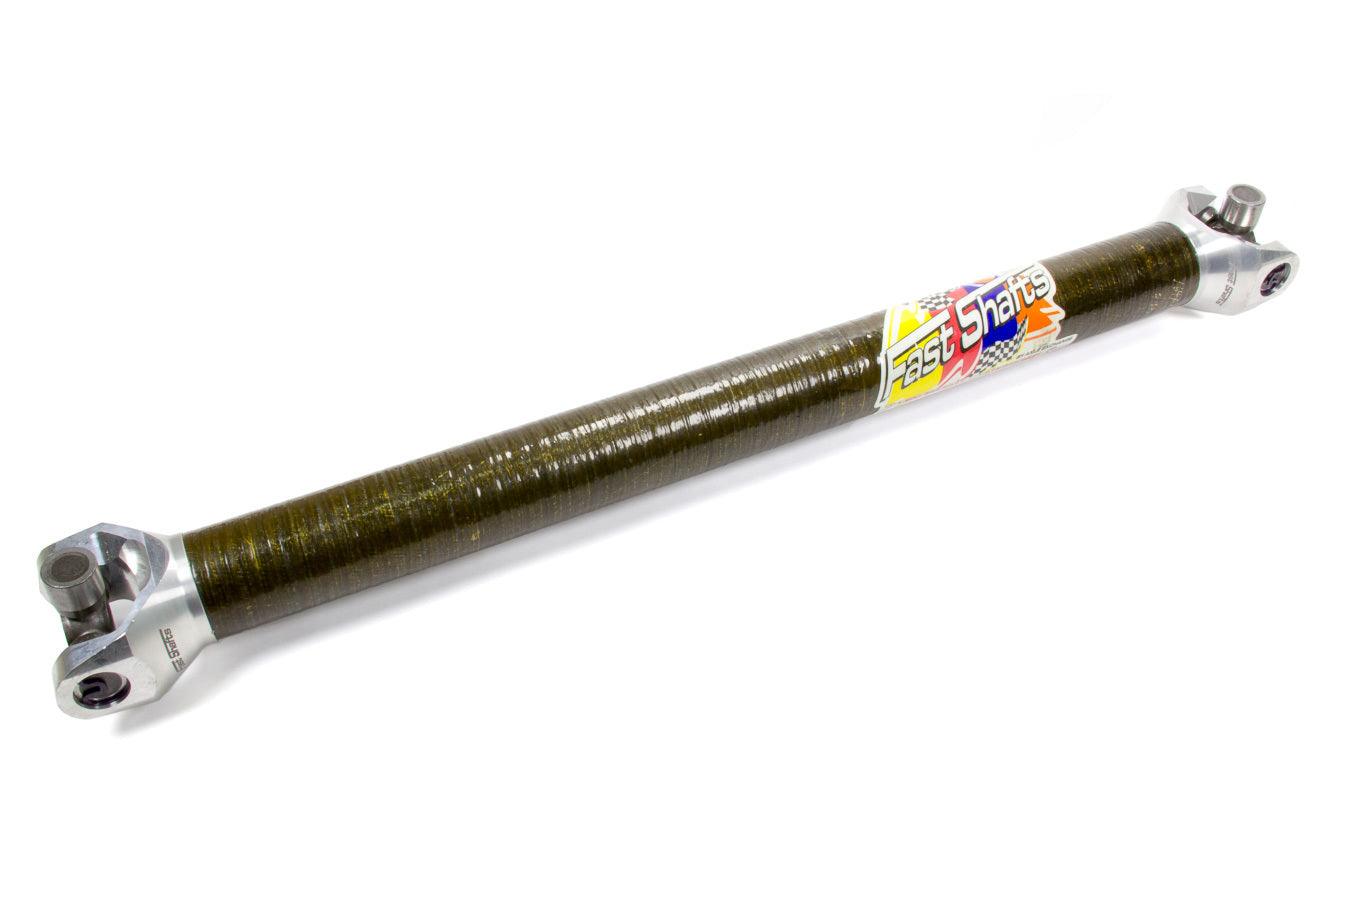 Driveshaft Carbon Fiber 38.0in Long 3-1/4in Dia - Burlile Performance Products